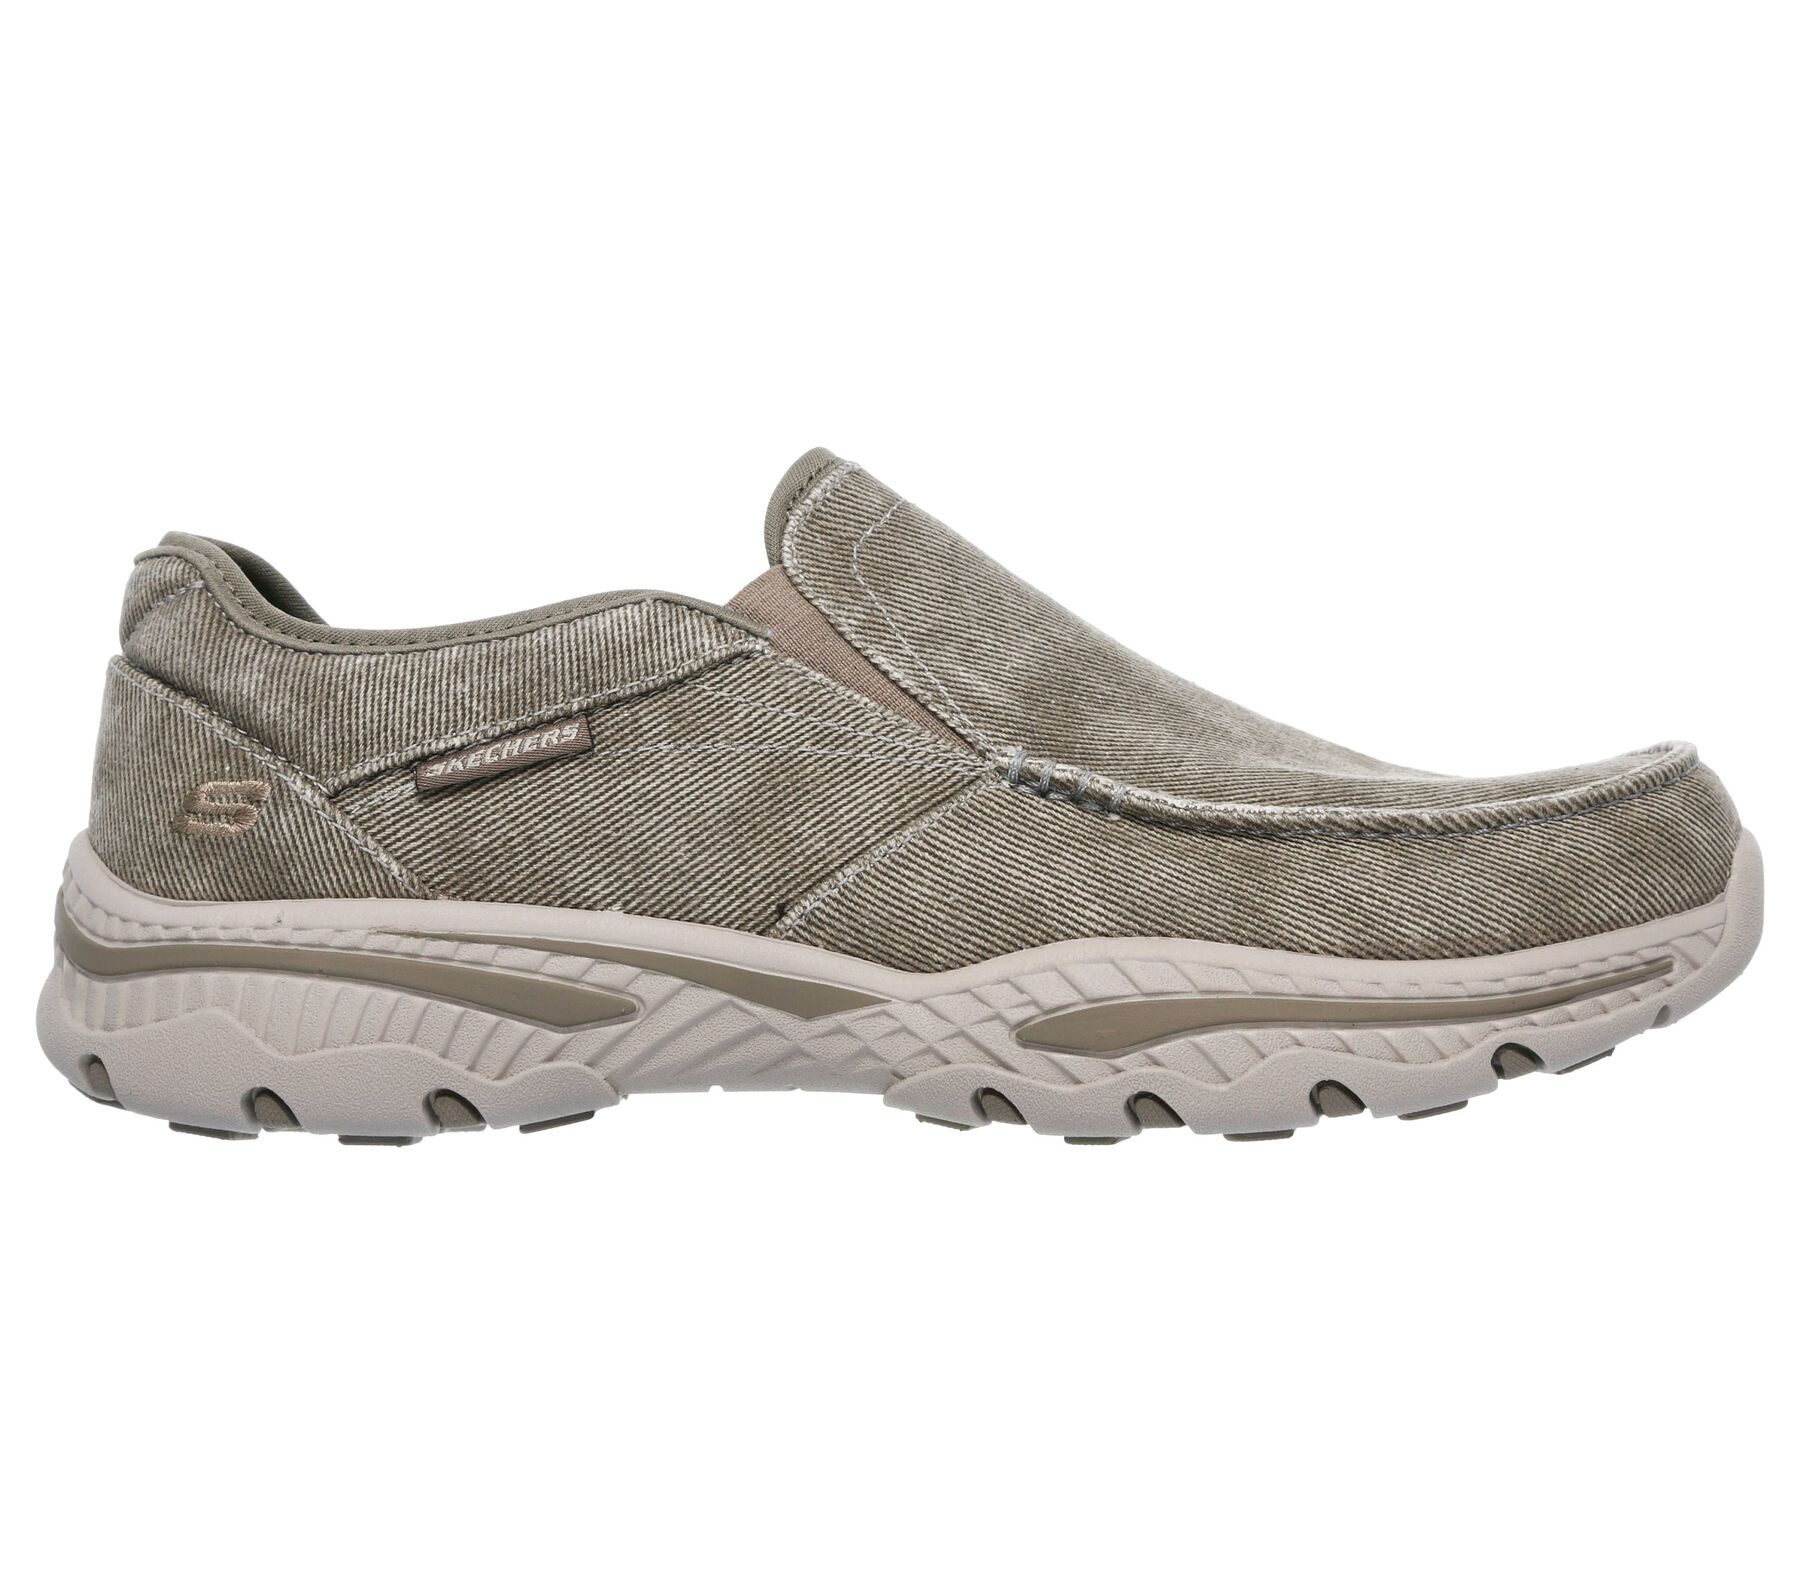 Shop the Relaxed Fit: Creston - Moseco | SKECHERS